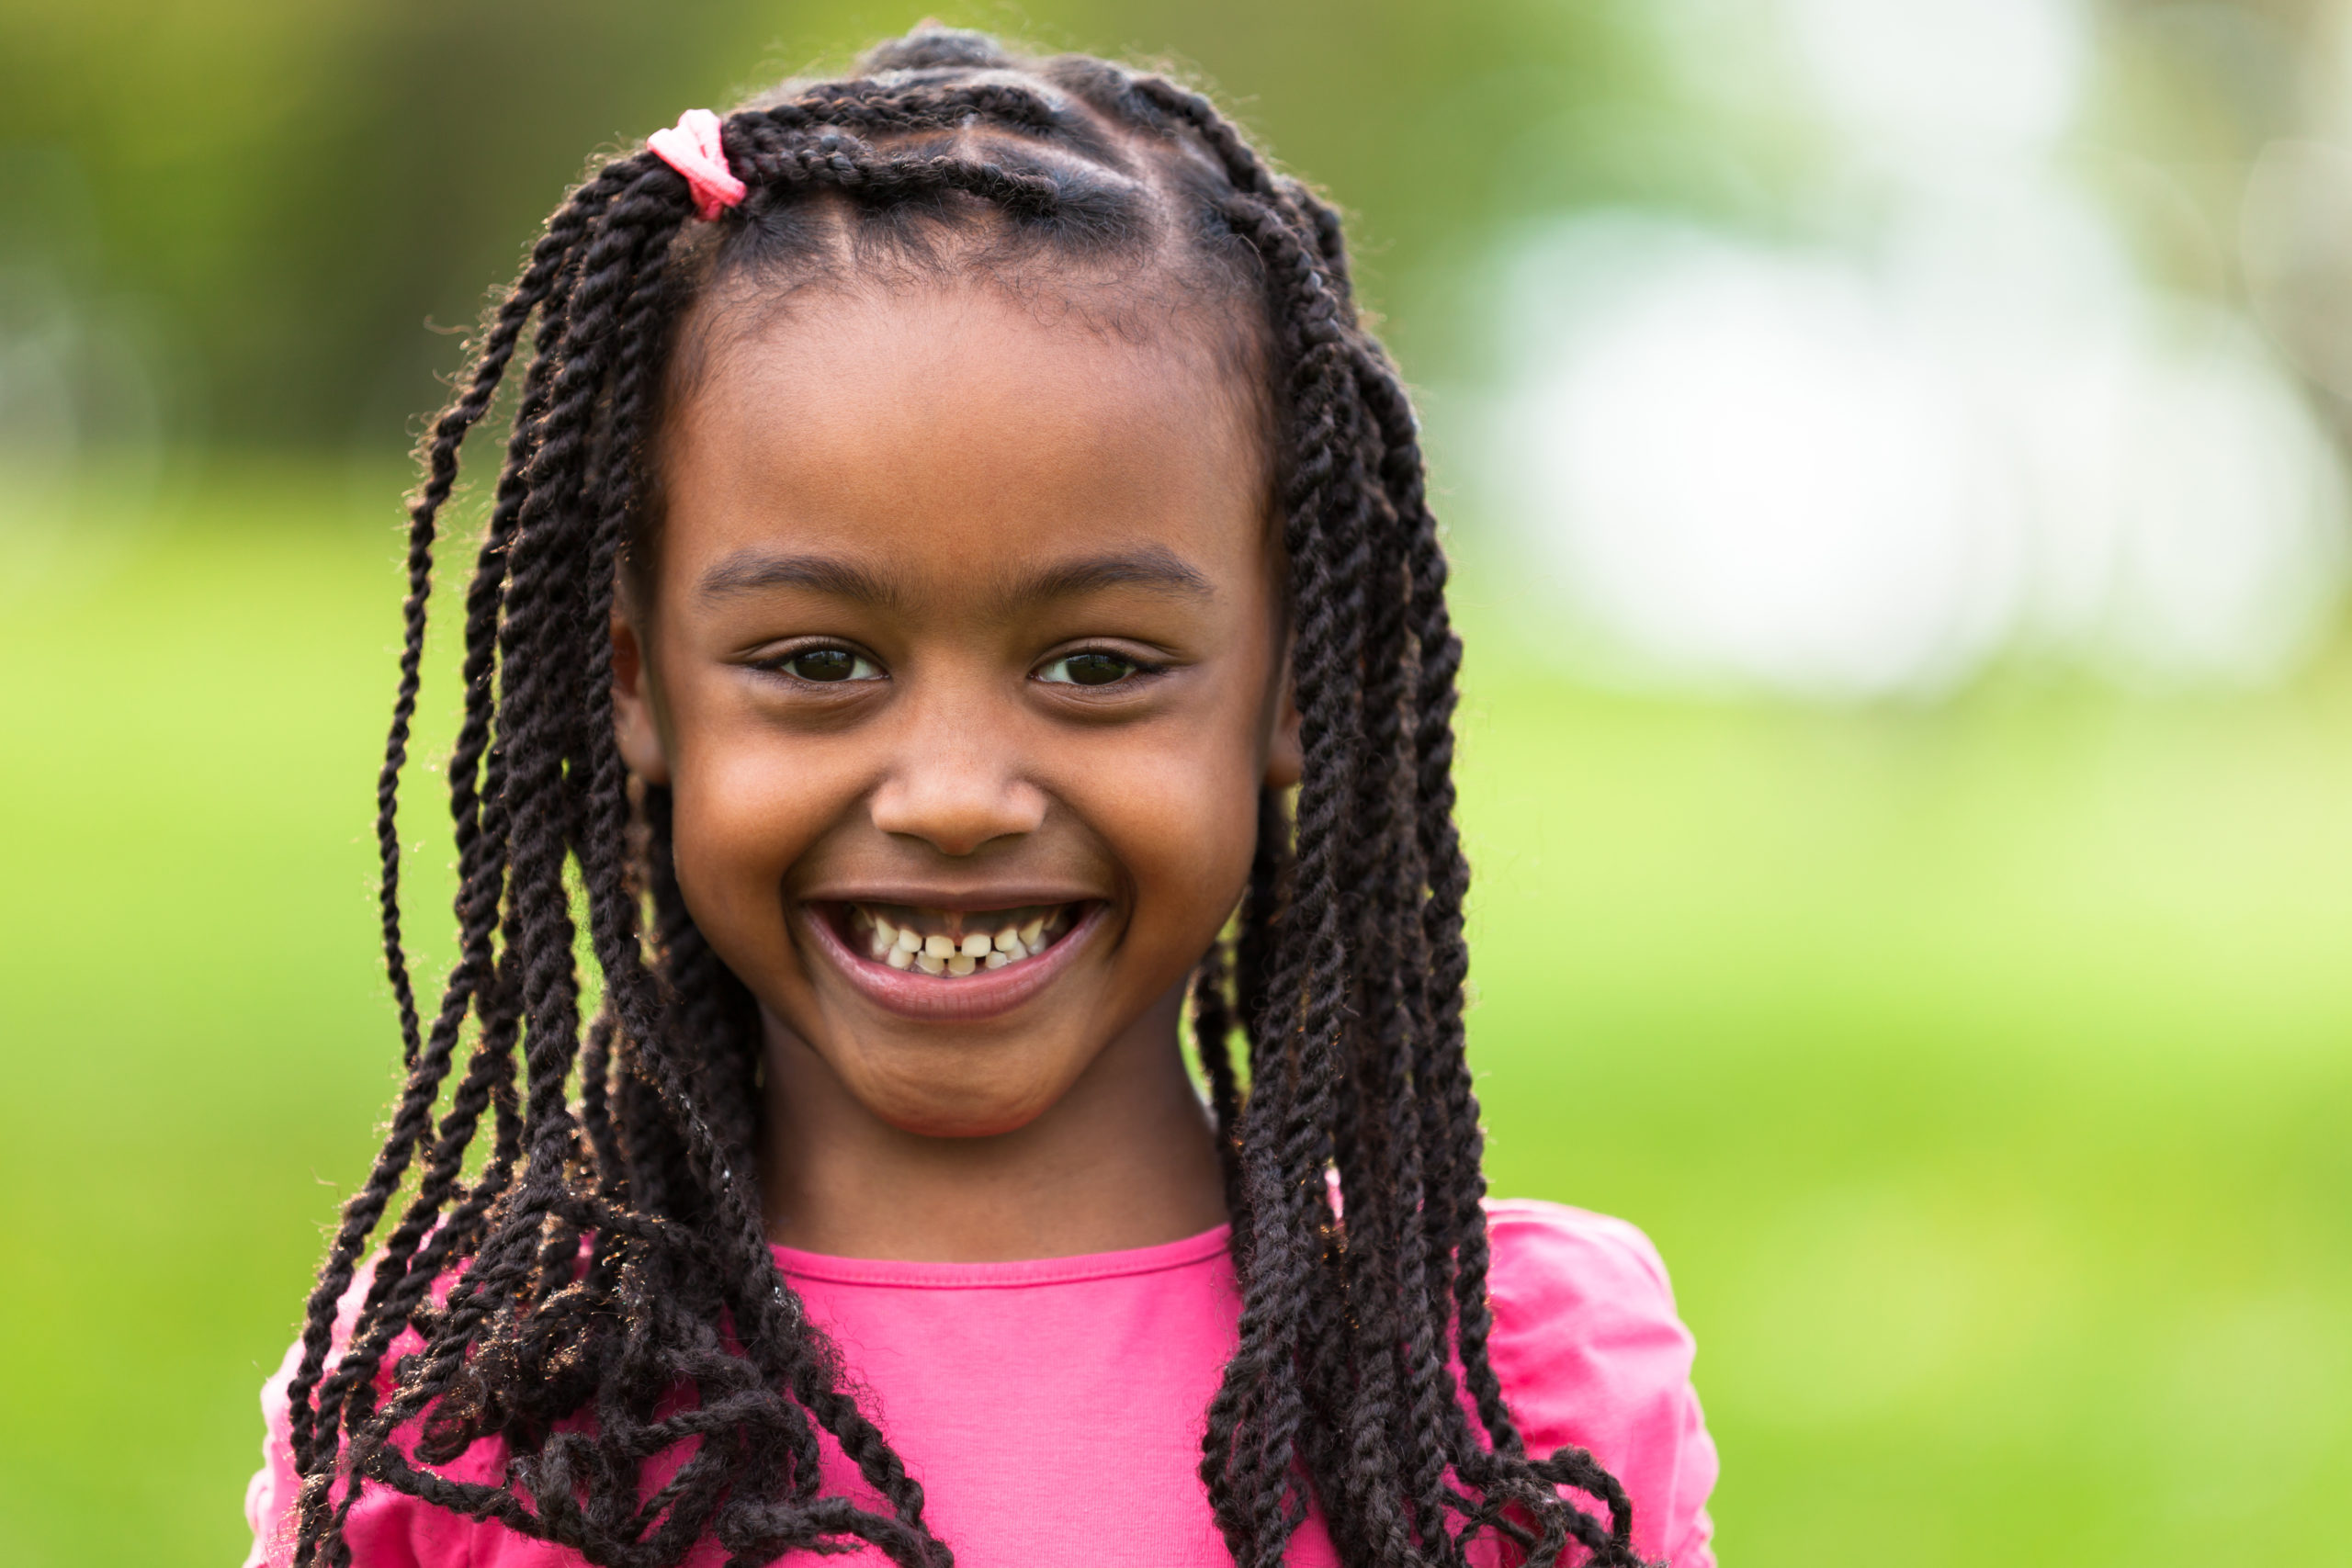 7 Easy Hairstyles For Young Black Kids - Successful Black Parenting Magazine